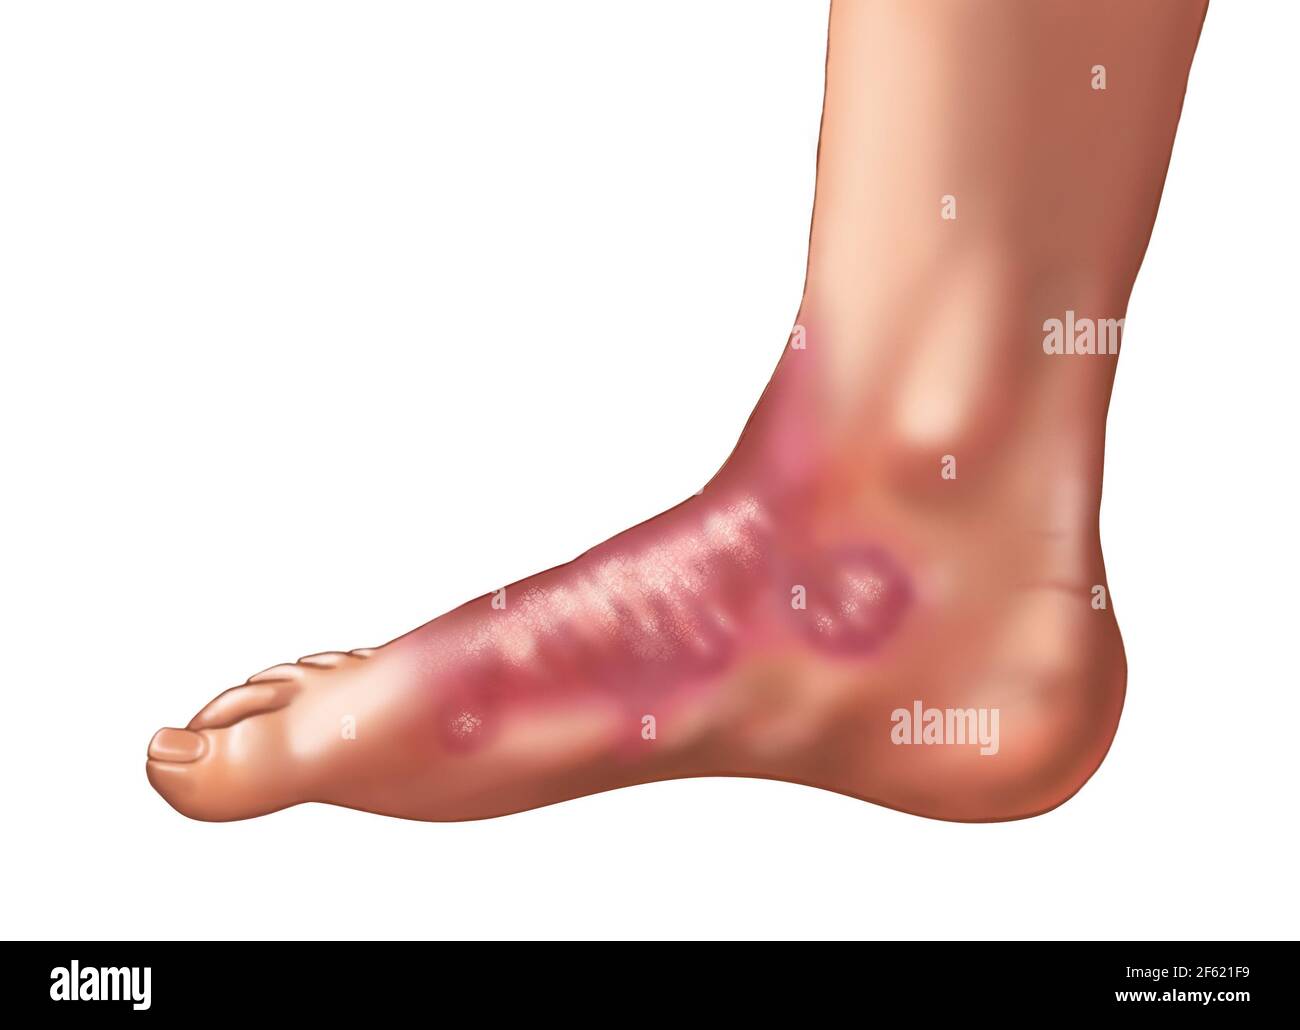 Psoriasis on the Foot Stock Photo